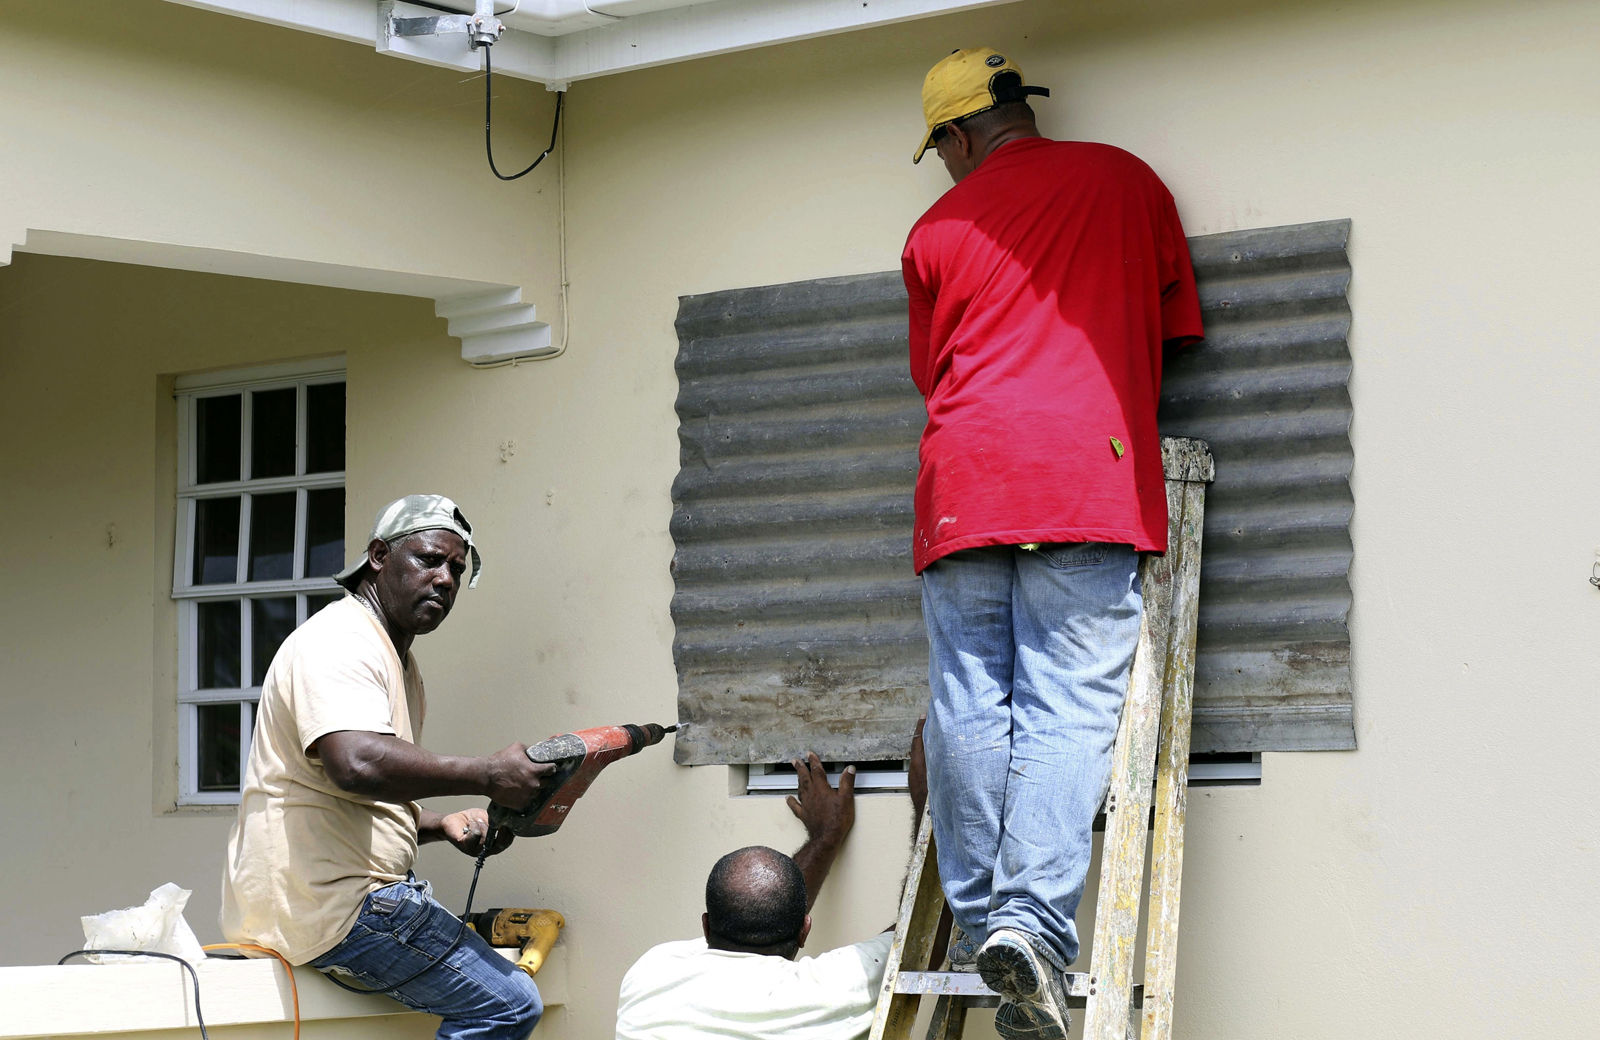 People put up a steel sheet over a window in preparation for Hurricane Irma, in Fort Road, St. John's, Antigua and Barbuda, Tuesday, Sept. 5, 2017.  Irma grew into a dangerous Category 5 storm, the most powerful seen in the Atlantic in over a decade, and roared toward islands in the northeast Caribbean Tuesday on a path that could eventually take it to the United States. (AP Photo/Johnny Jno-Baptiste)